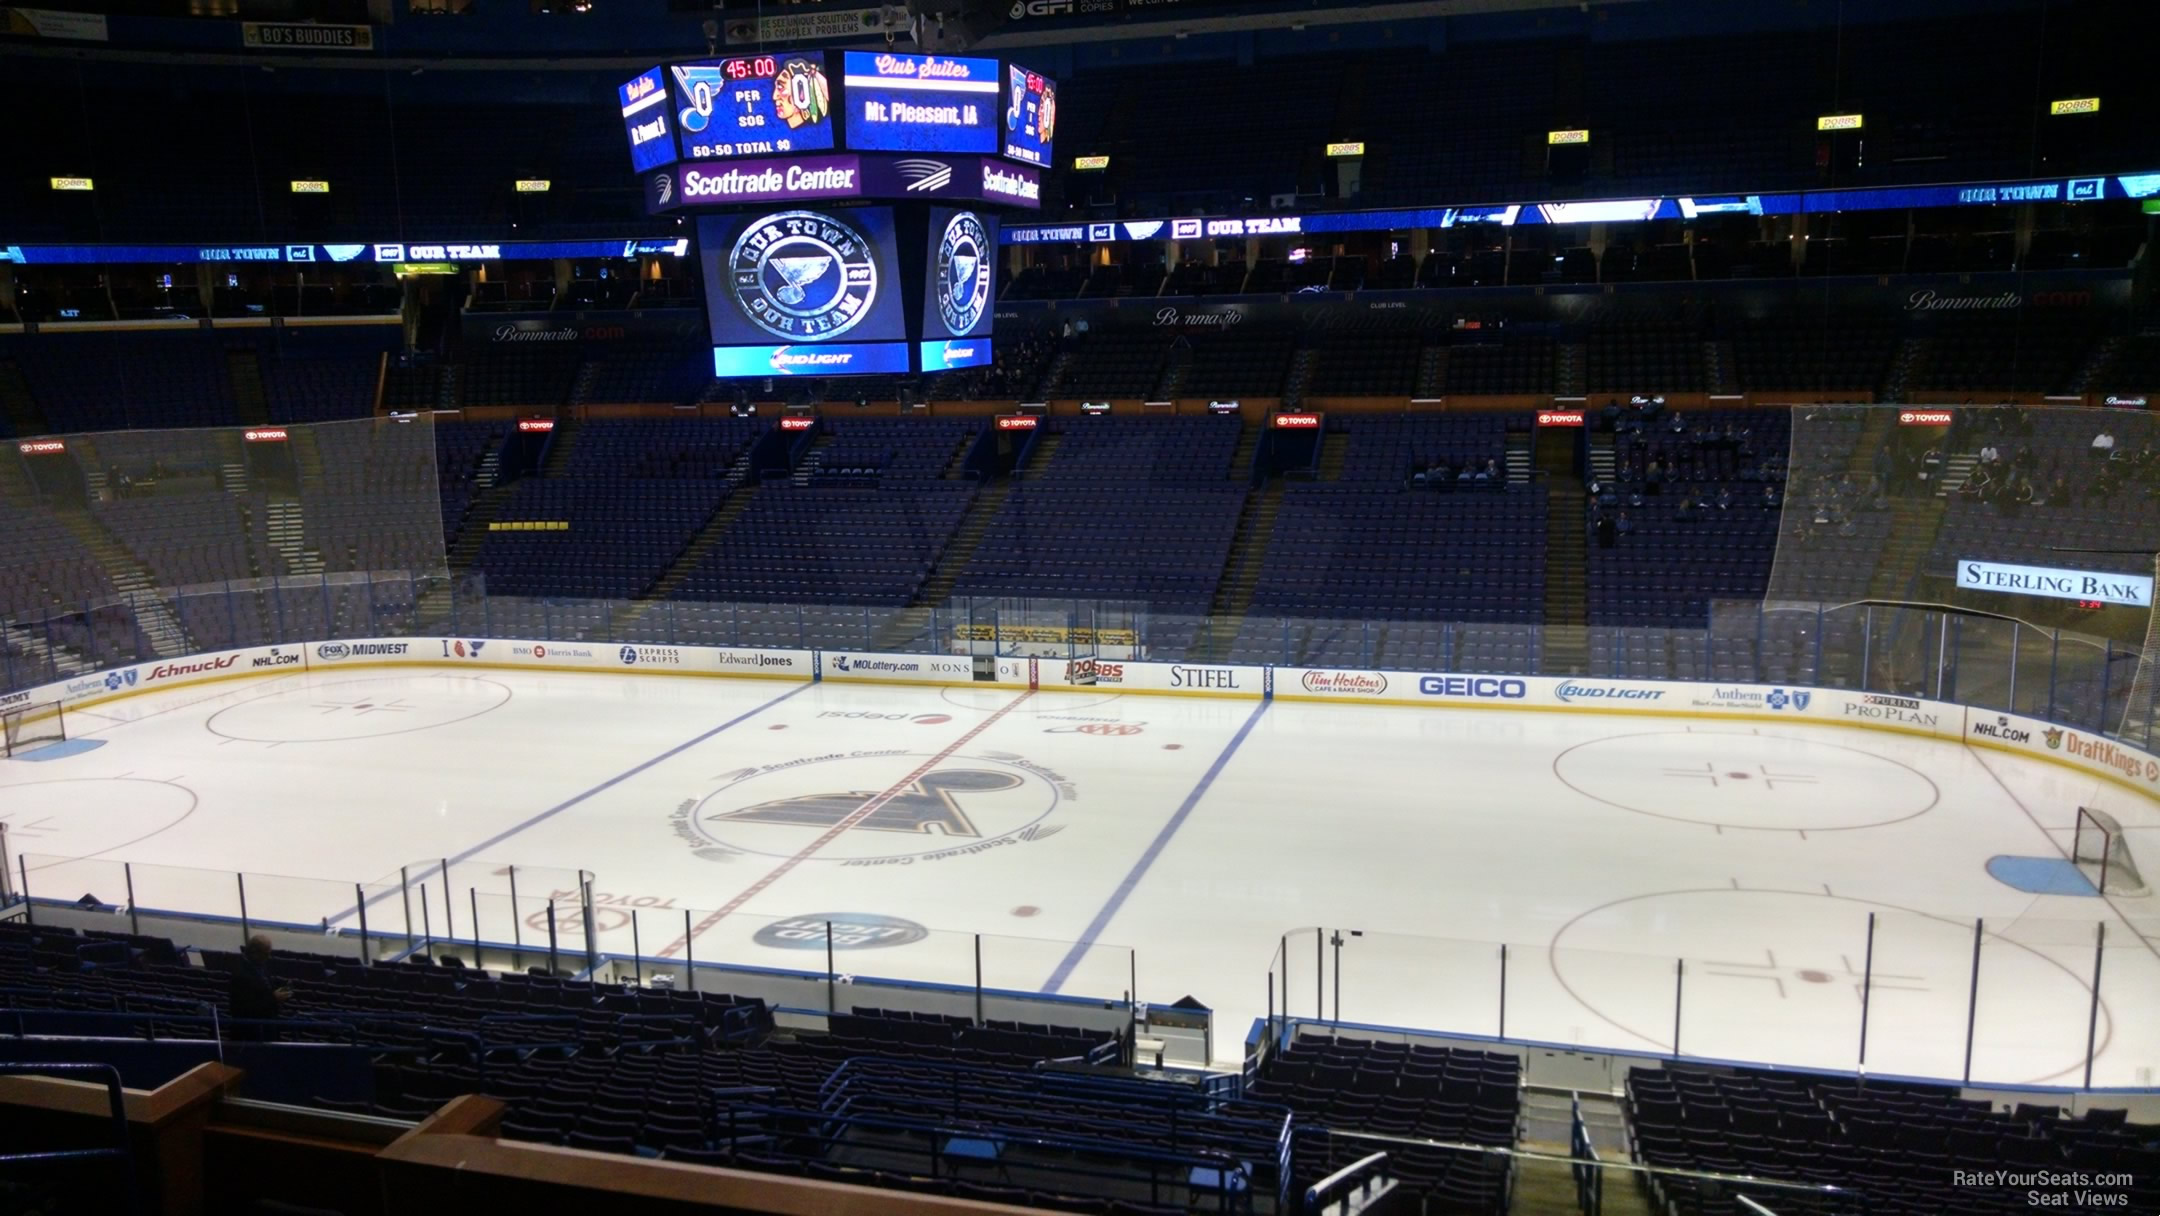 St. Louis Enterprise Center seating chart - St. Louis Blues NHL hockey game  arena stadium - Individual 'find my seat' locator showing how are seats &  rows numbered in VIP Glass rinkside